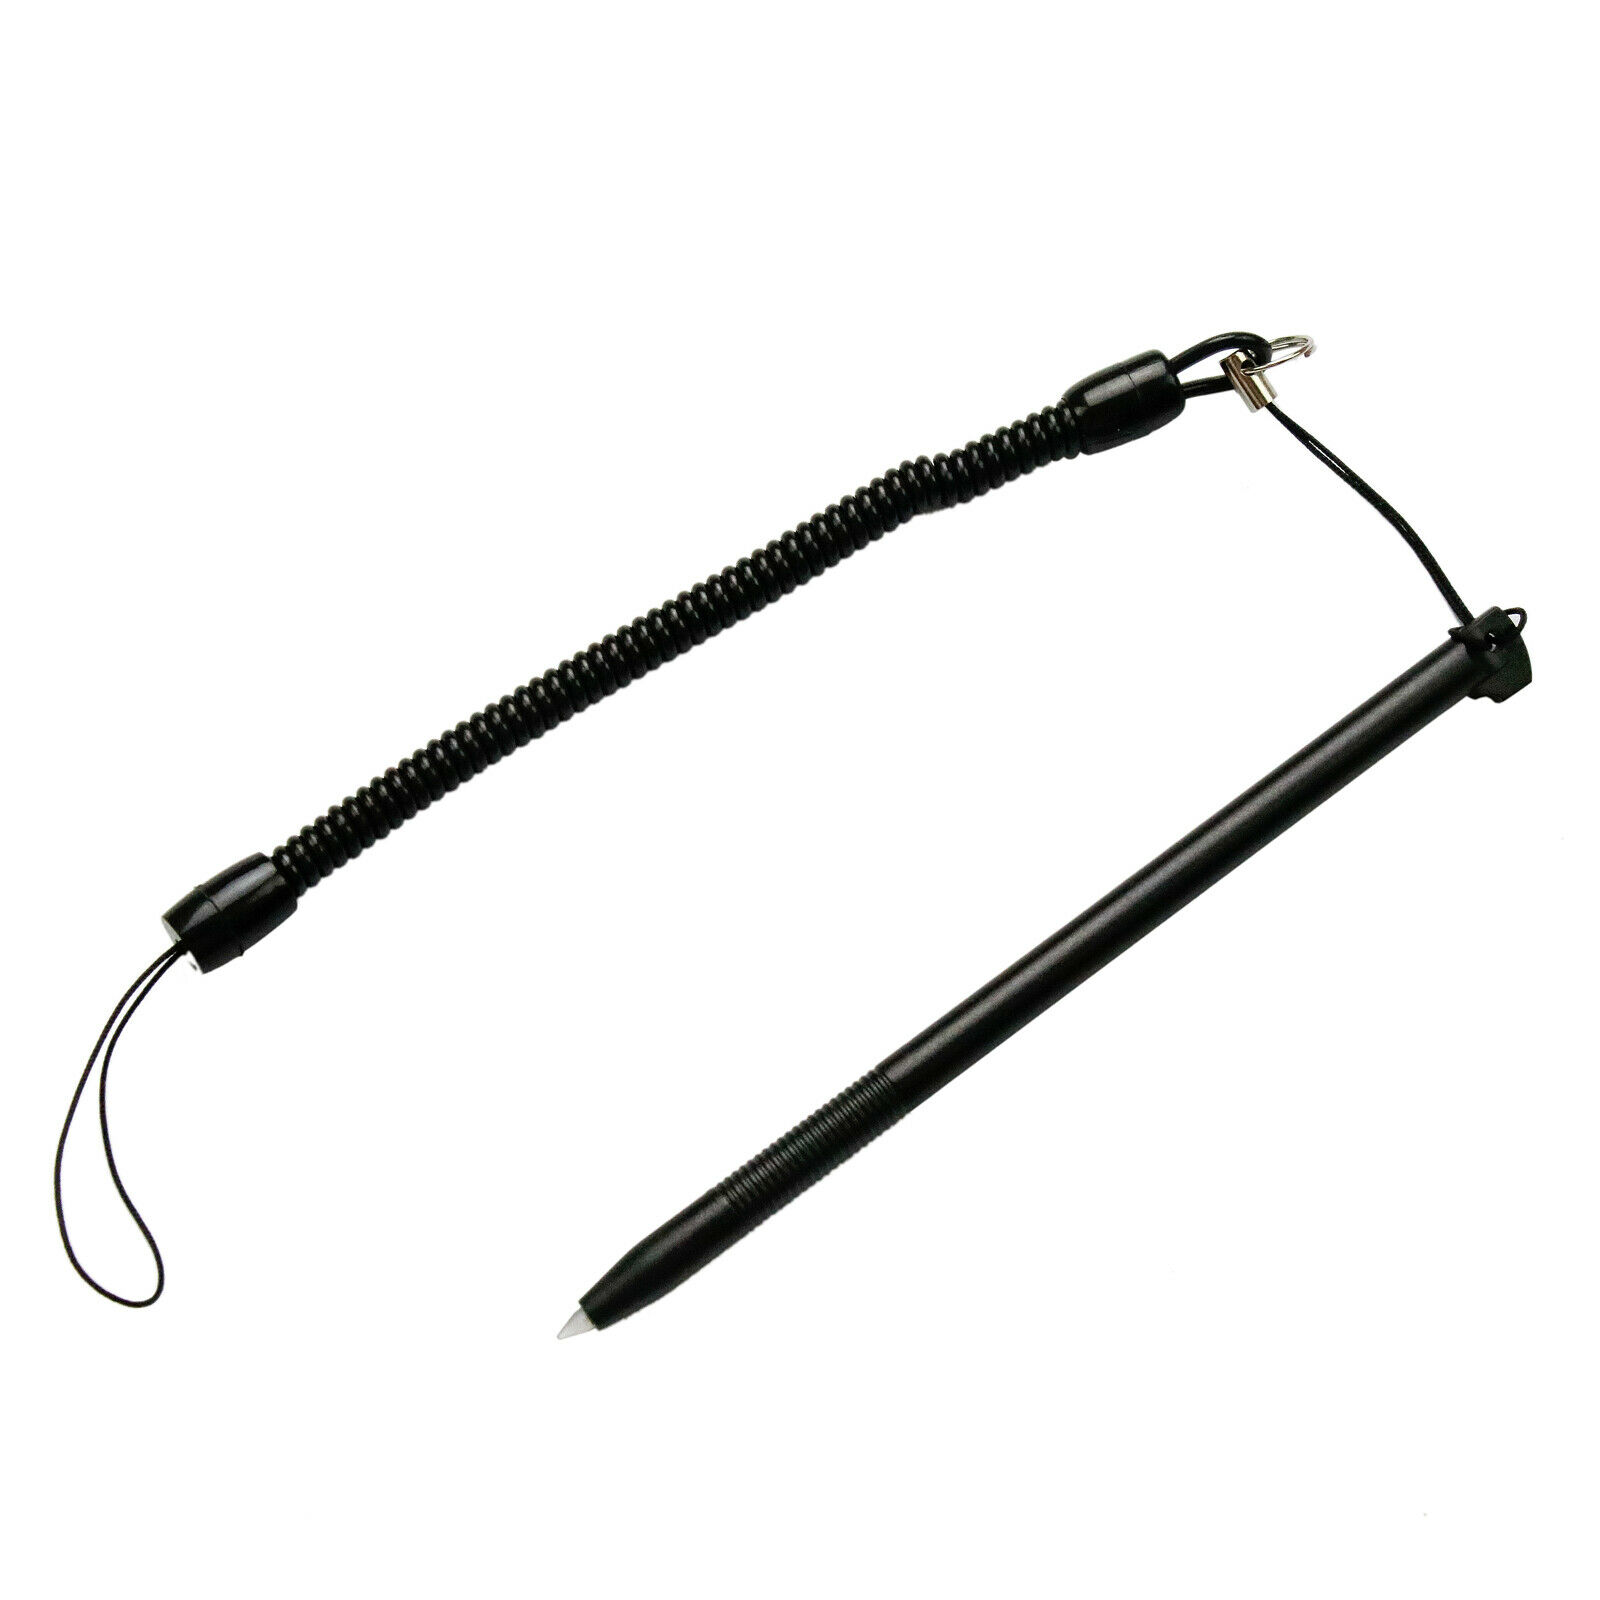 New Stylus Pen+tether Strap For Toughbook Cf-53 Cf-30 Cf-31 Cf-74 Touchscreen